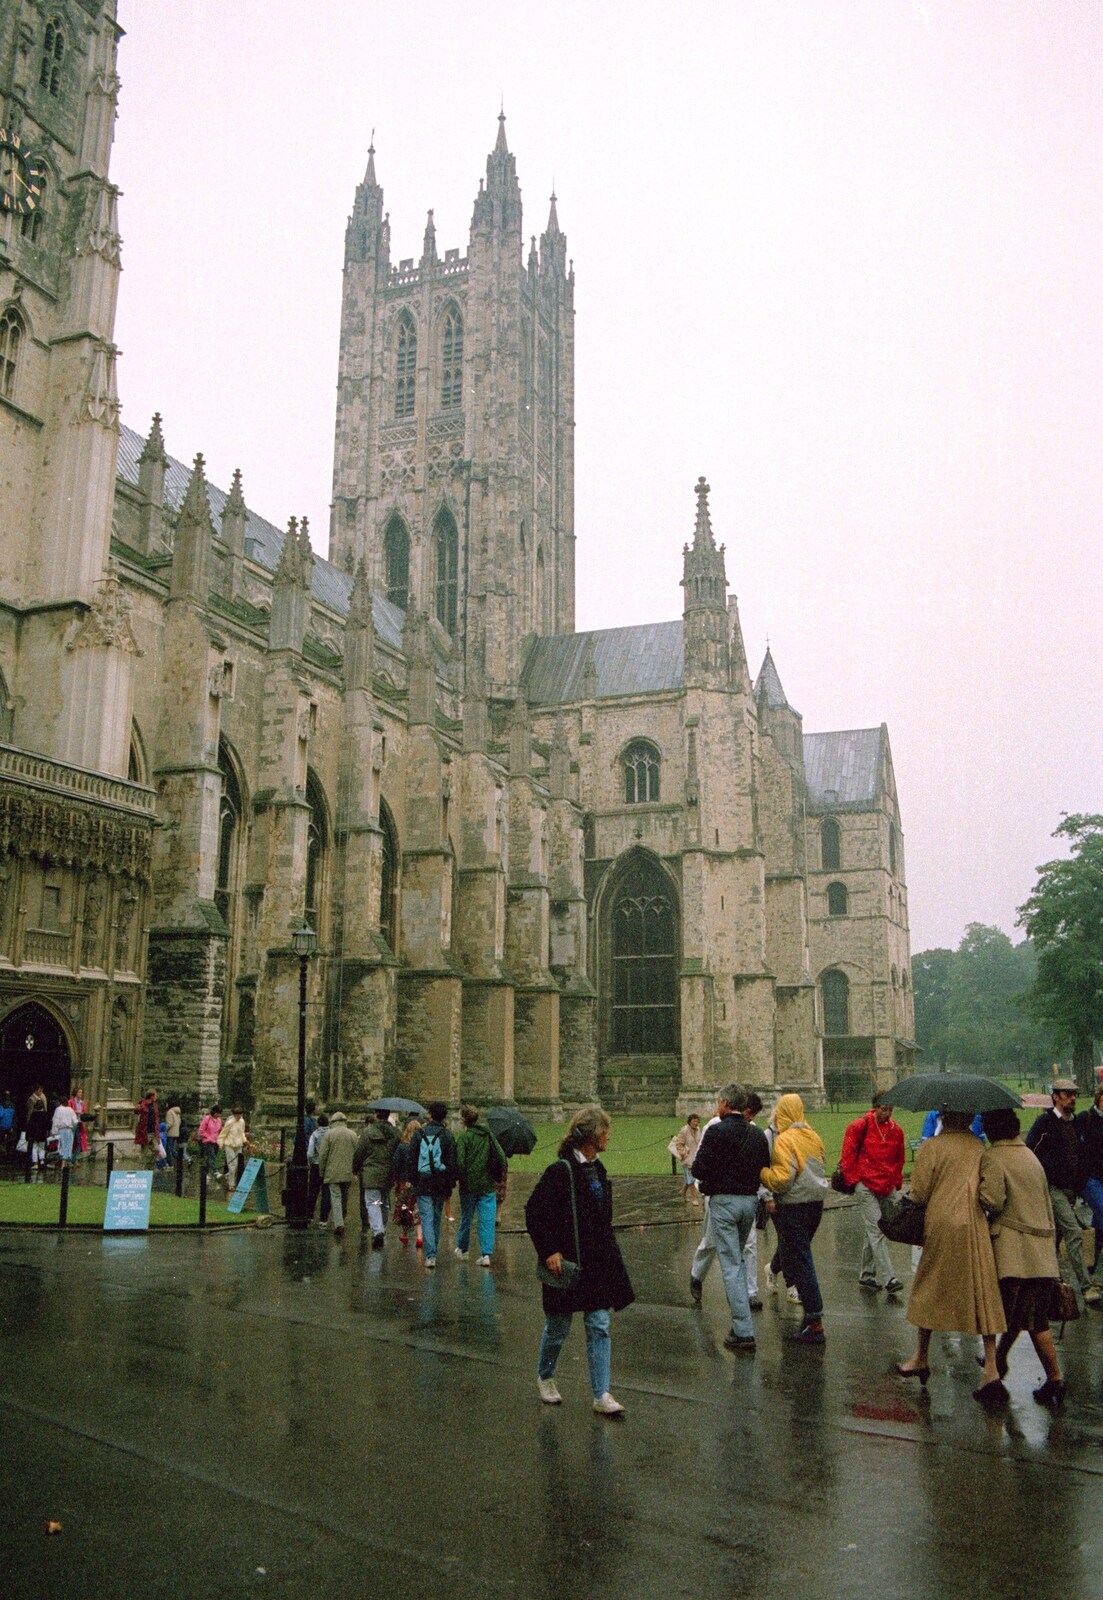 Crowds in the rain outside Canterbury cathedral from Network Day with Hamish, The South East - 21st June 1986